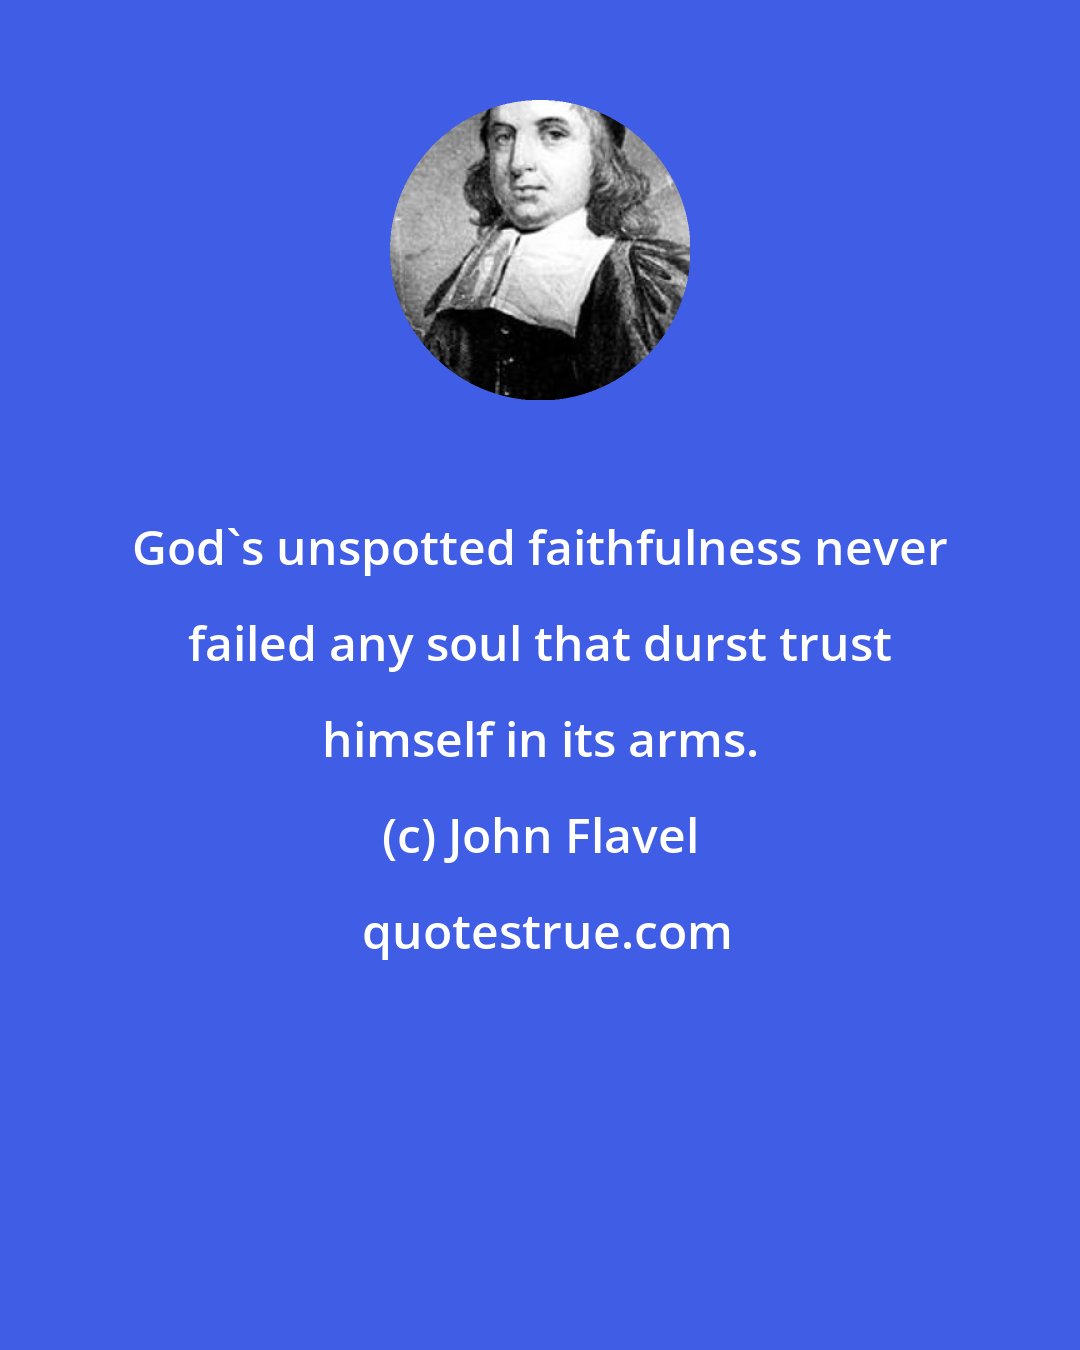 John Flavel: God's unspotted faithfulness never failed any soul that durst trust himself in its arms.